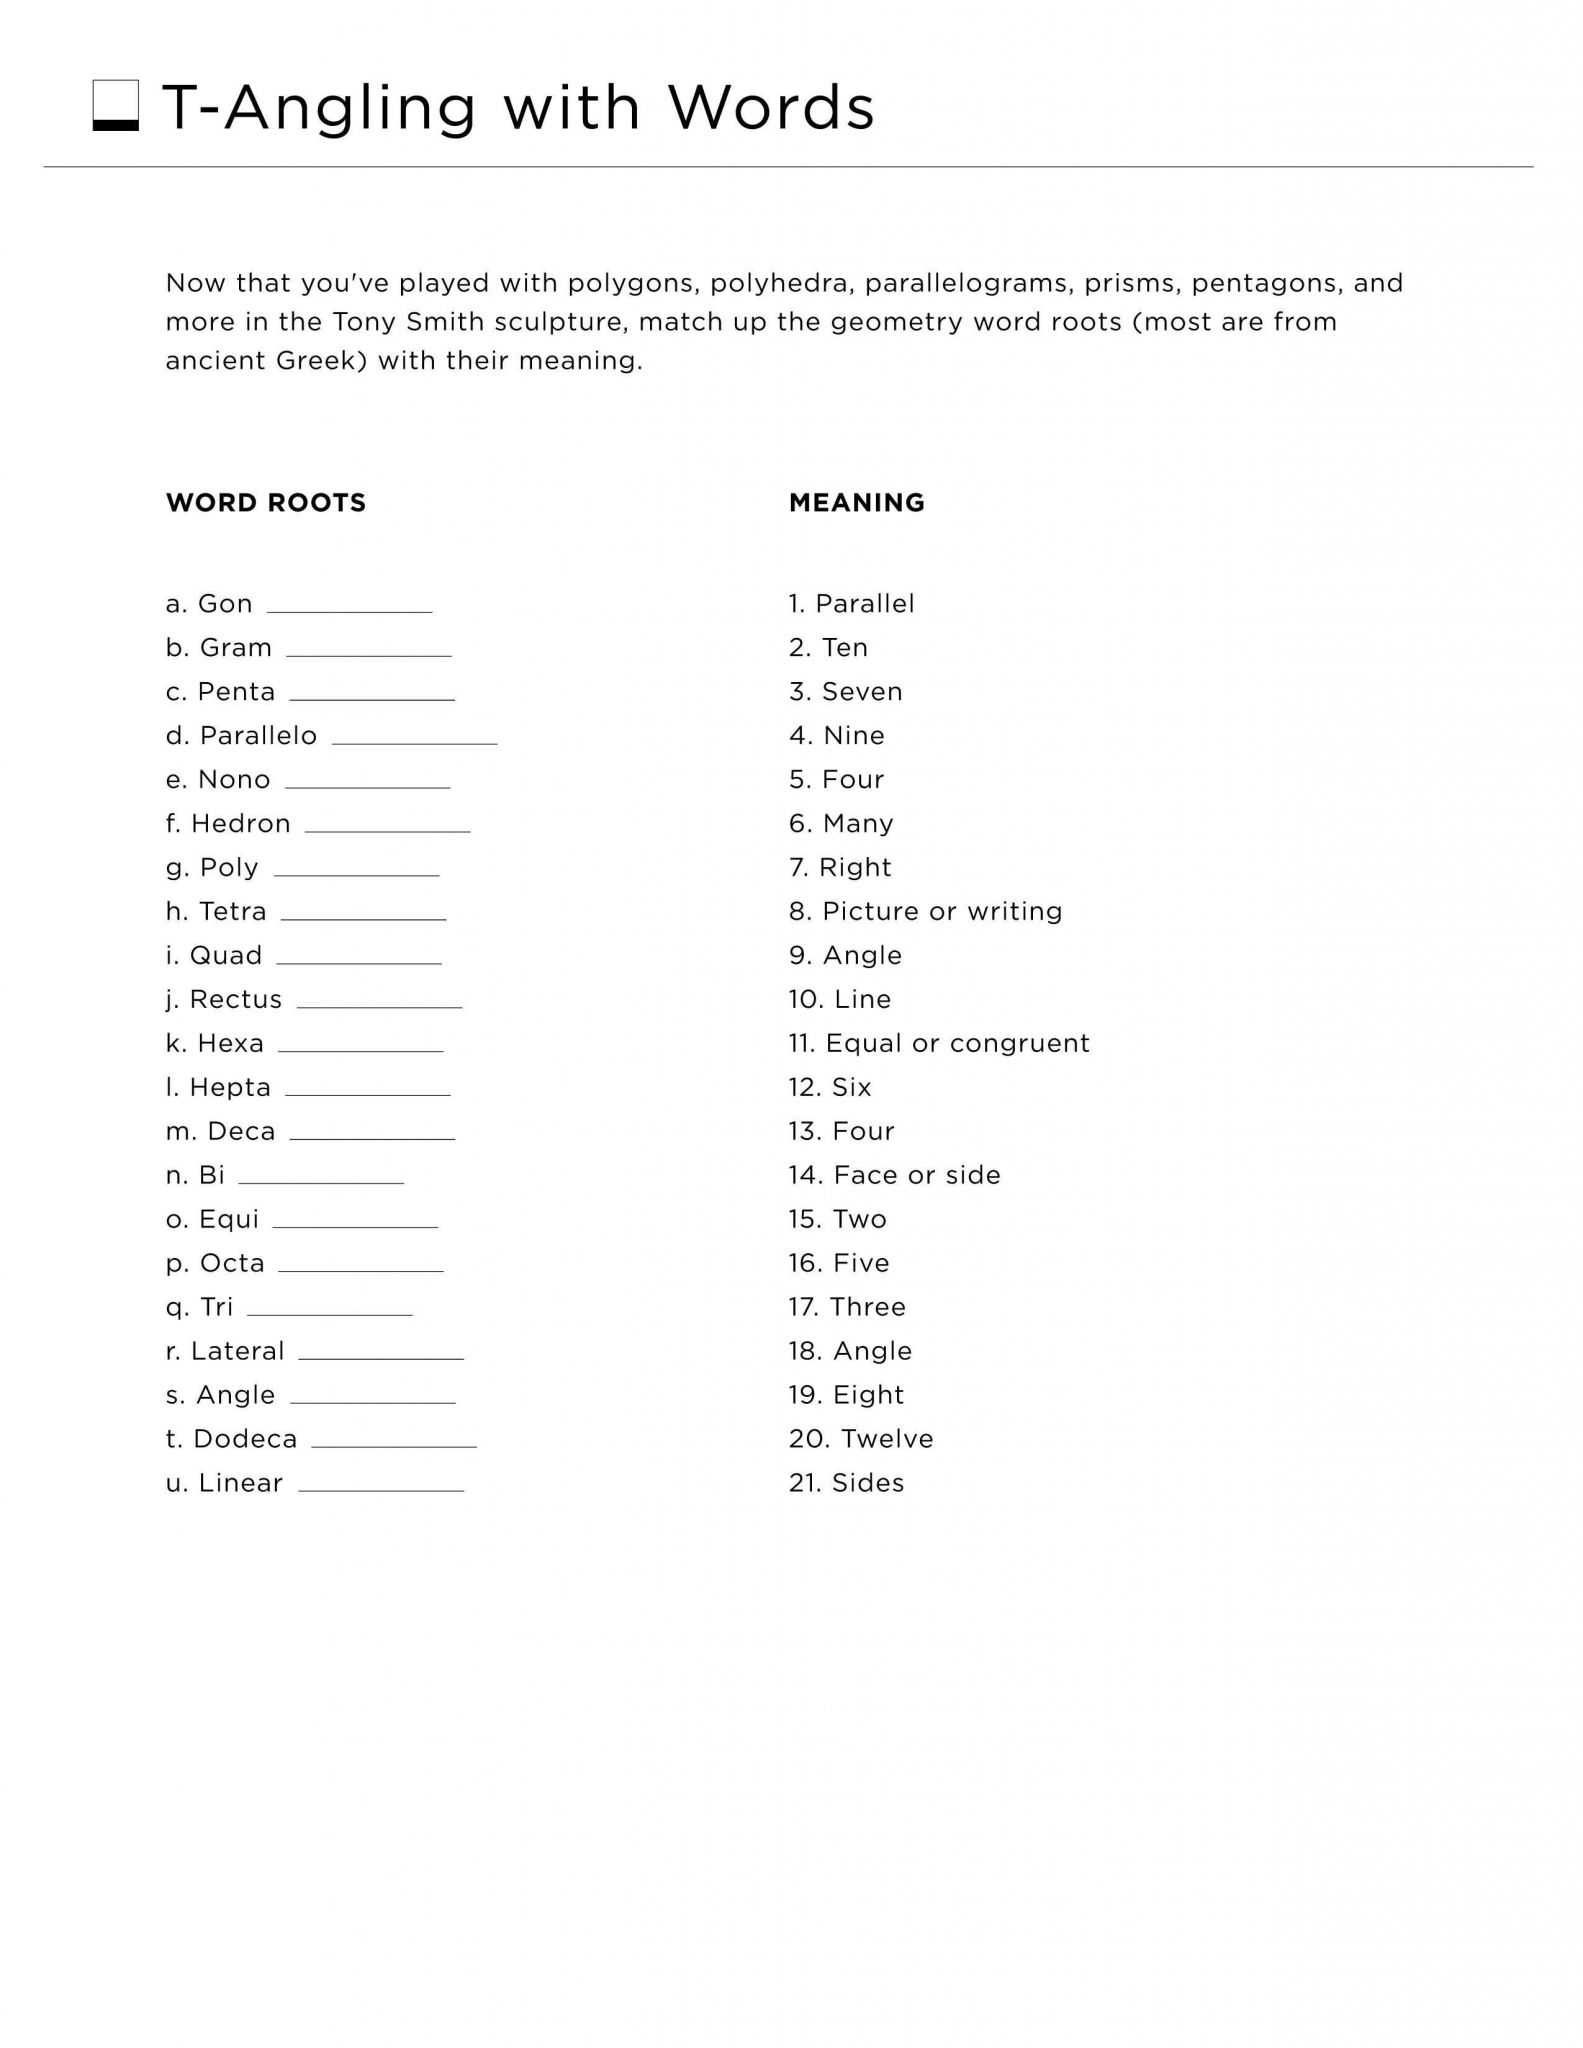 Geometry Reflection Worksheet together with T Angling with Words” Worksheet ask Students to Match Geometry Word